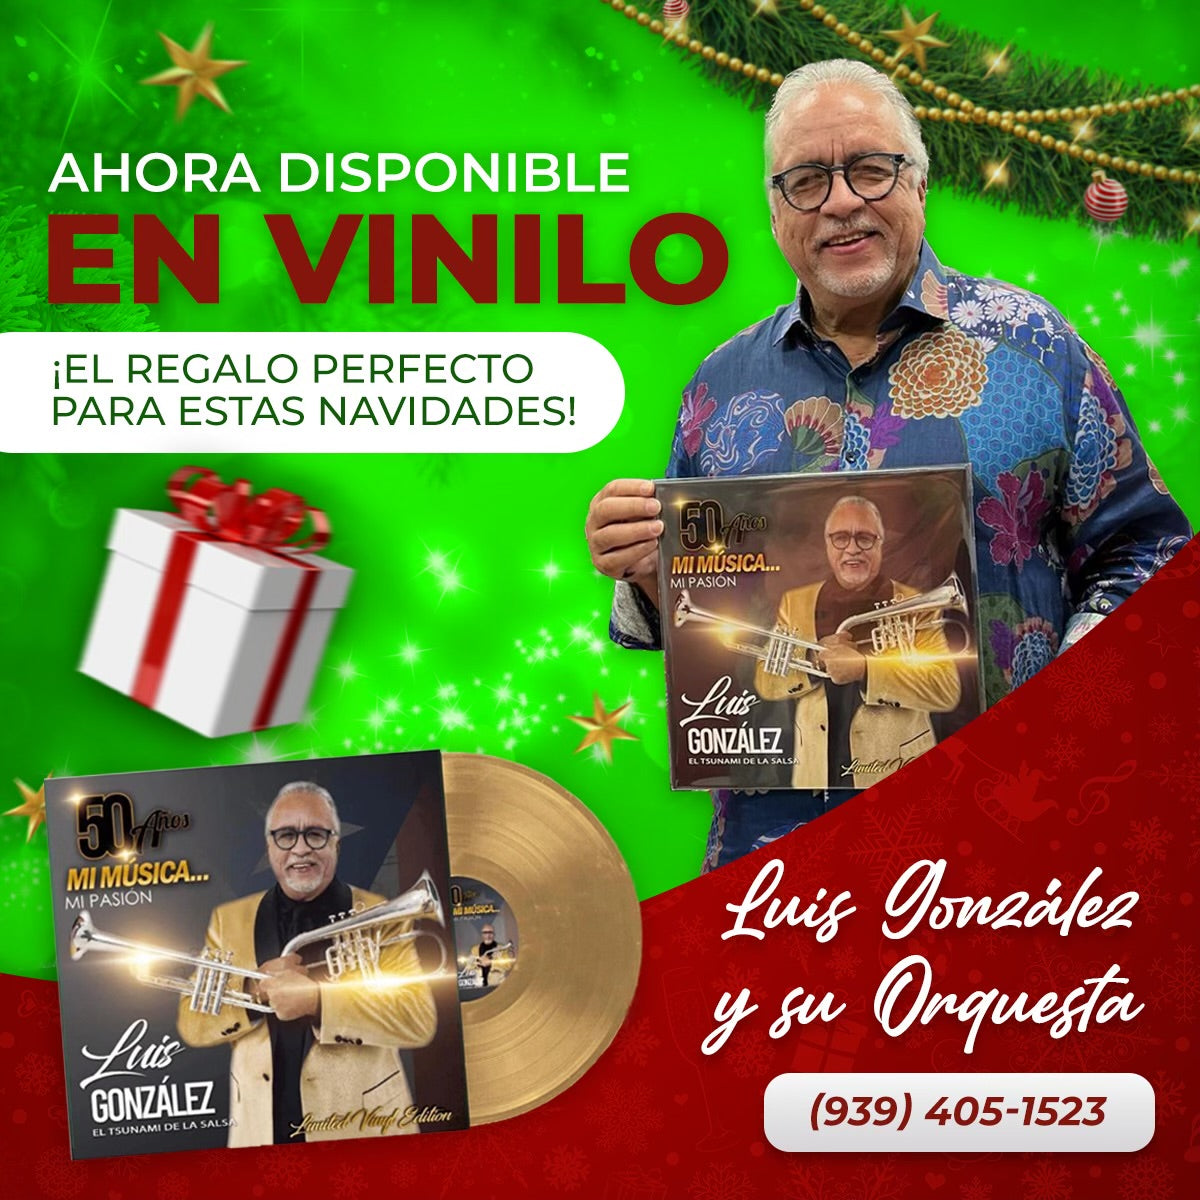 Luis Gonzalez and his Orchestra - Limited Edition Gold Vinyl